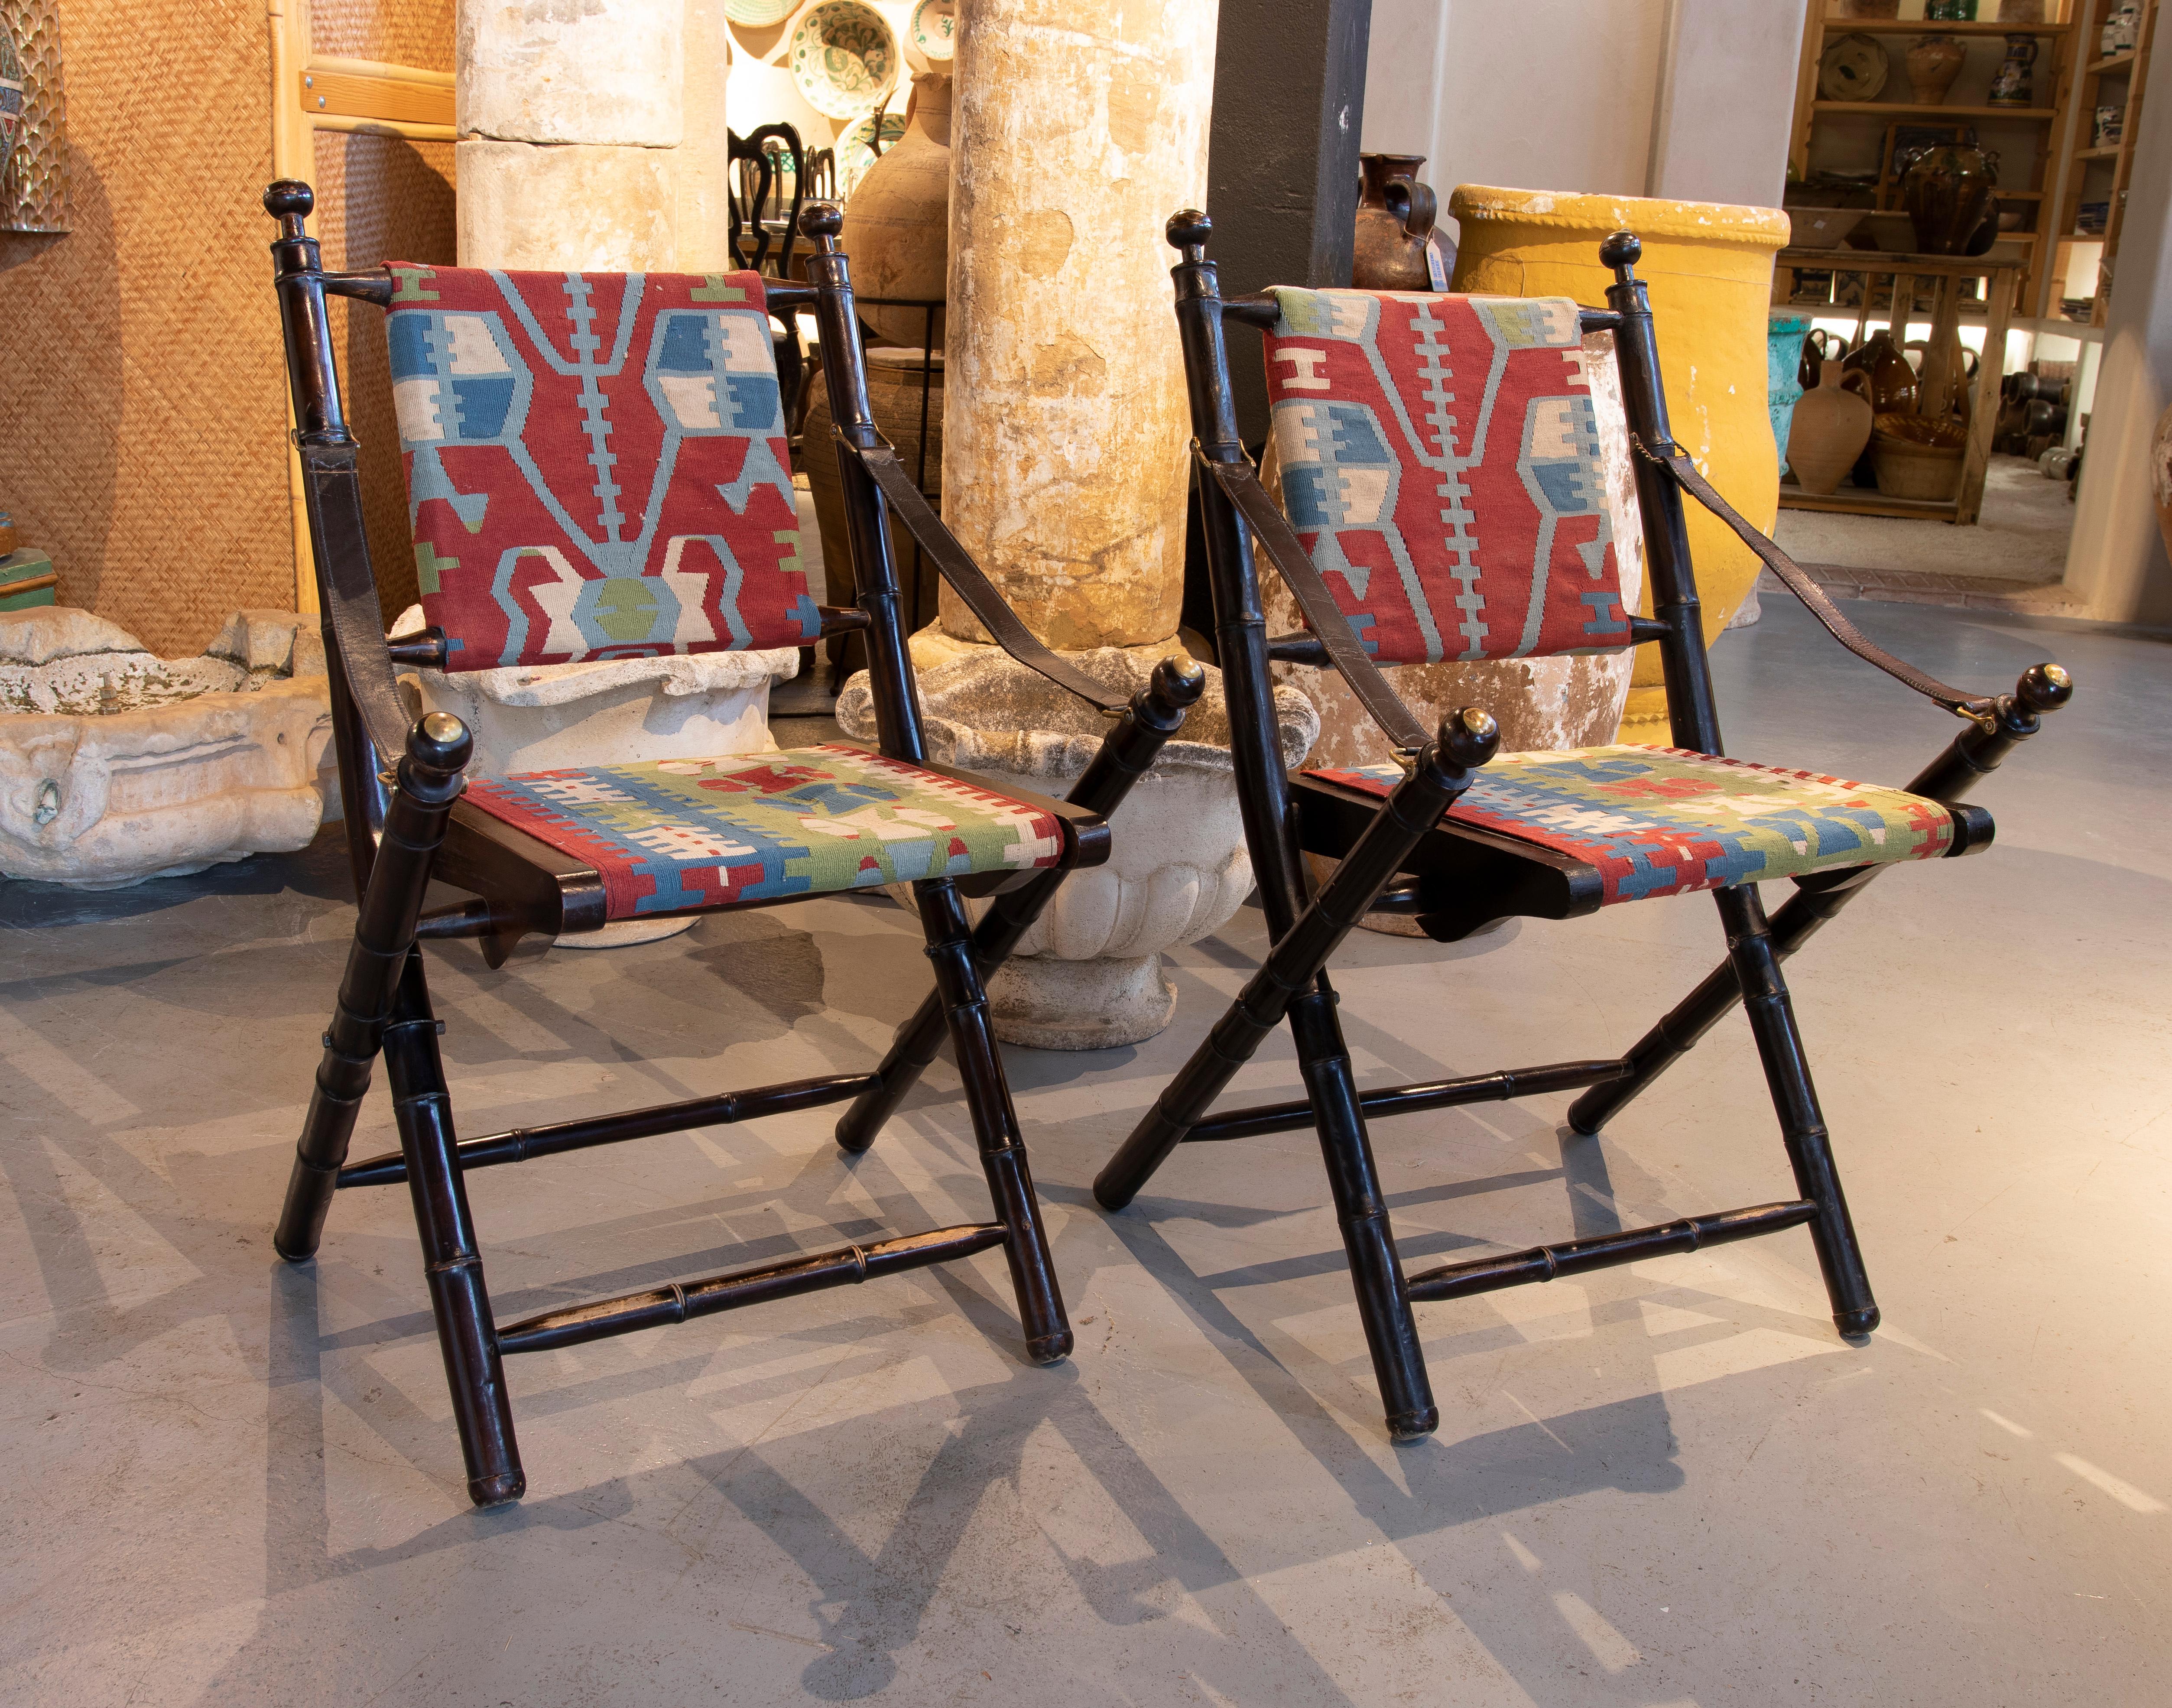 Spanish Pair of Leather Folding Chairs with Hand-Stitched Kilim Seat and Backrest